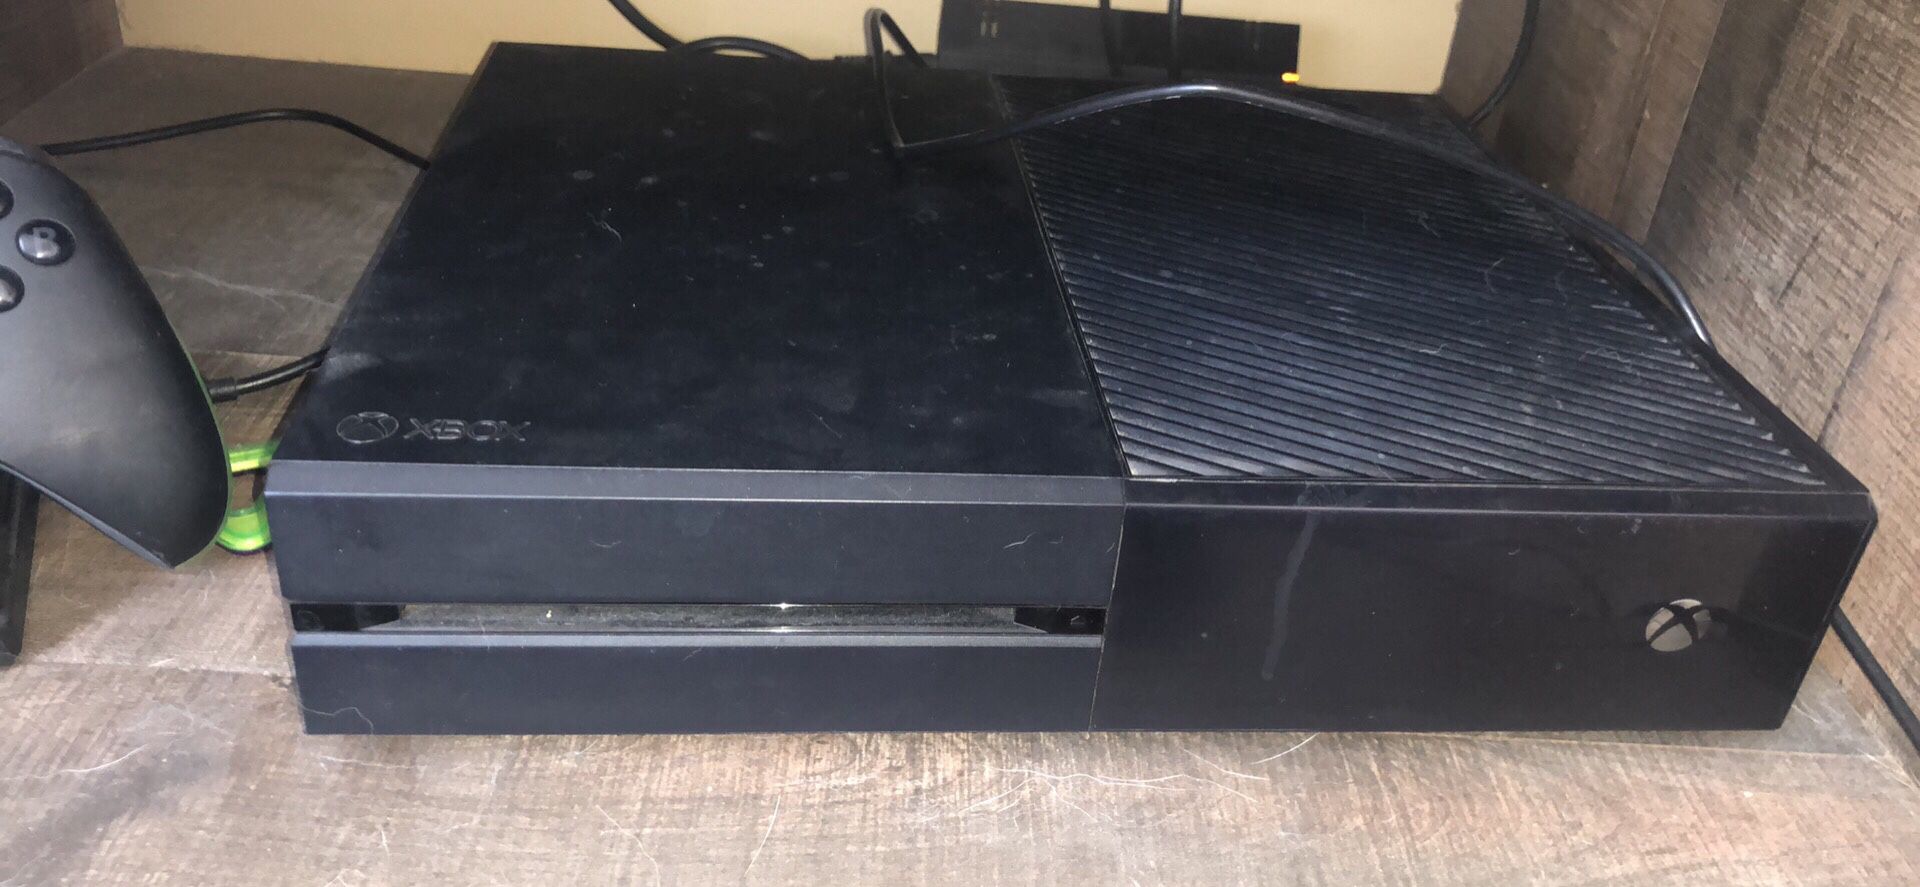 1TB Xbox one with accessories